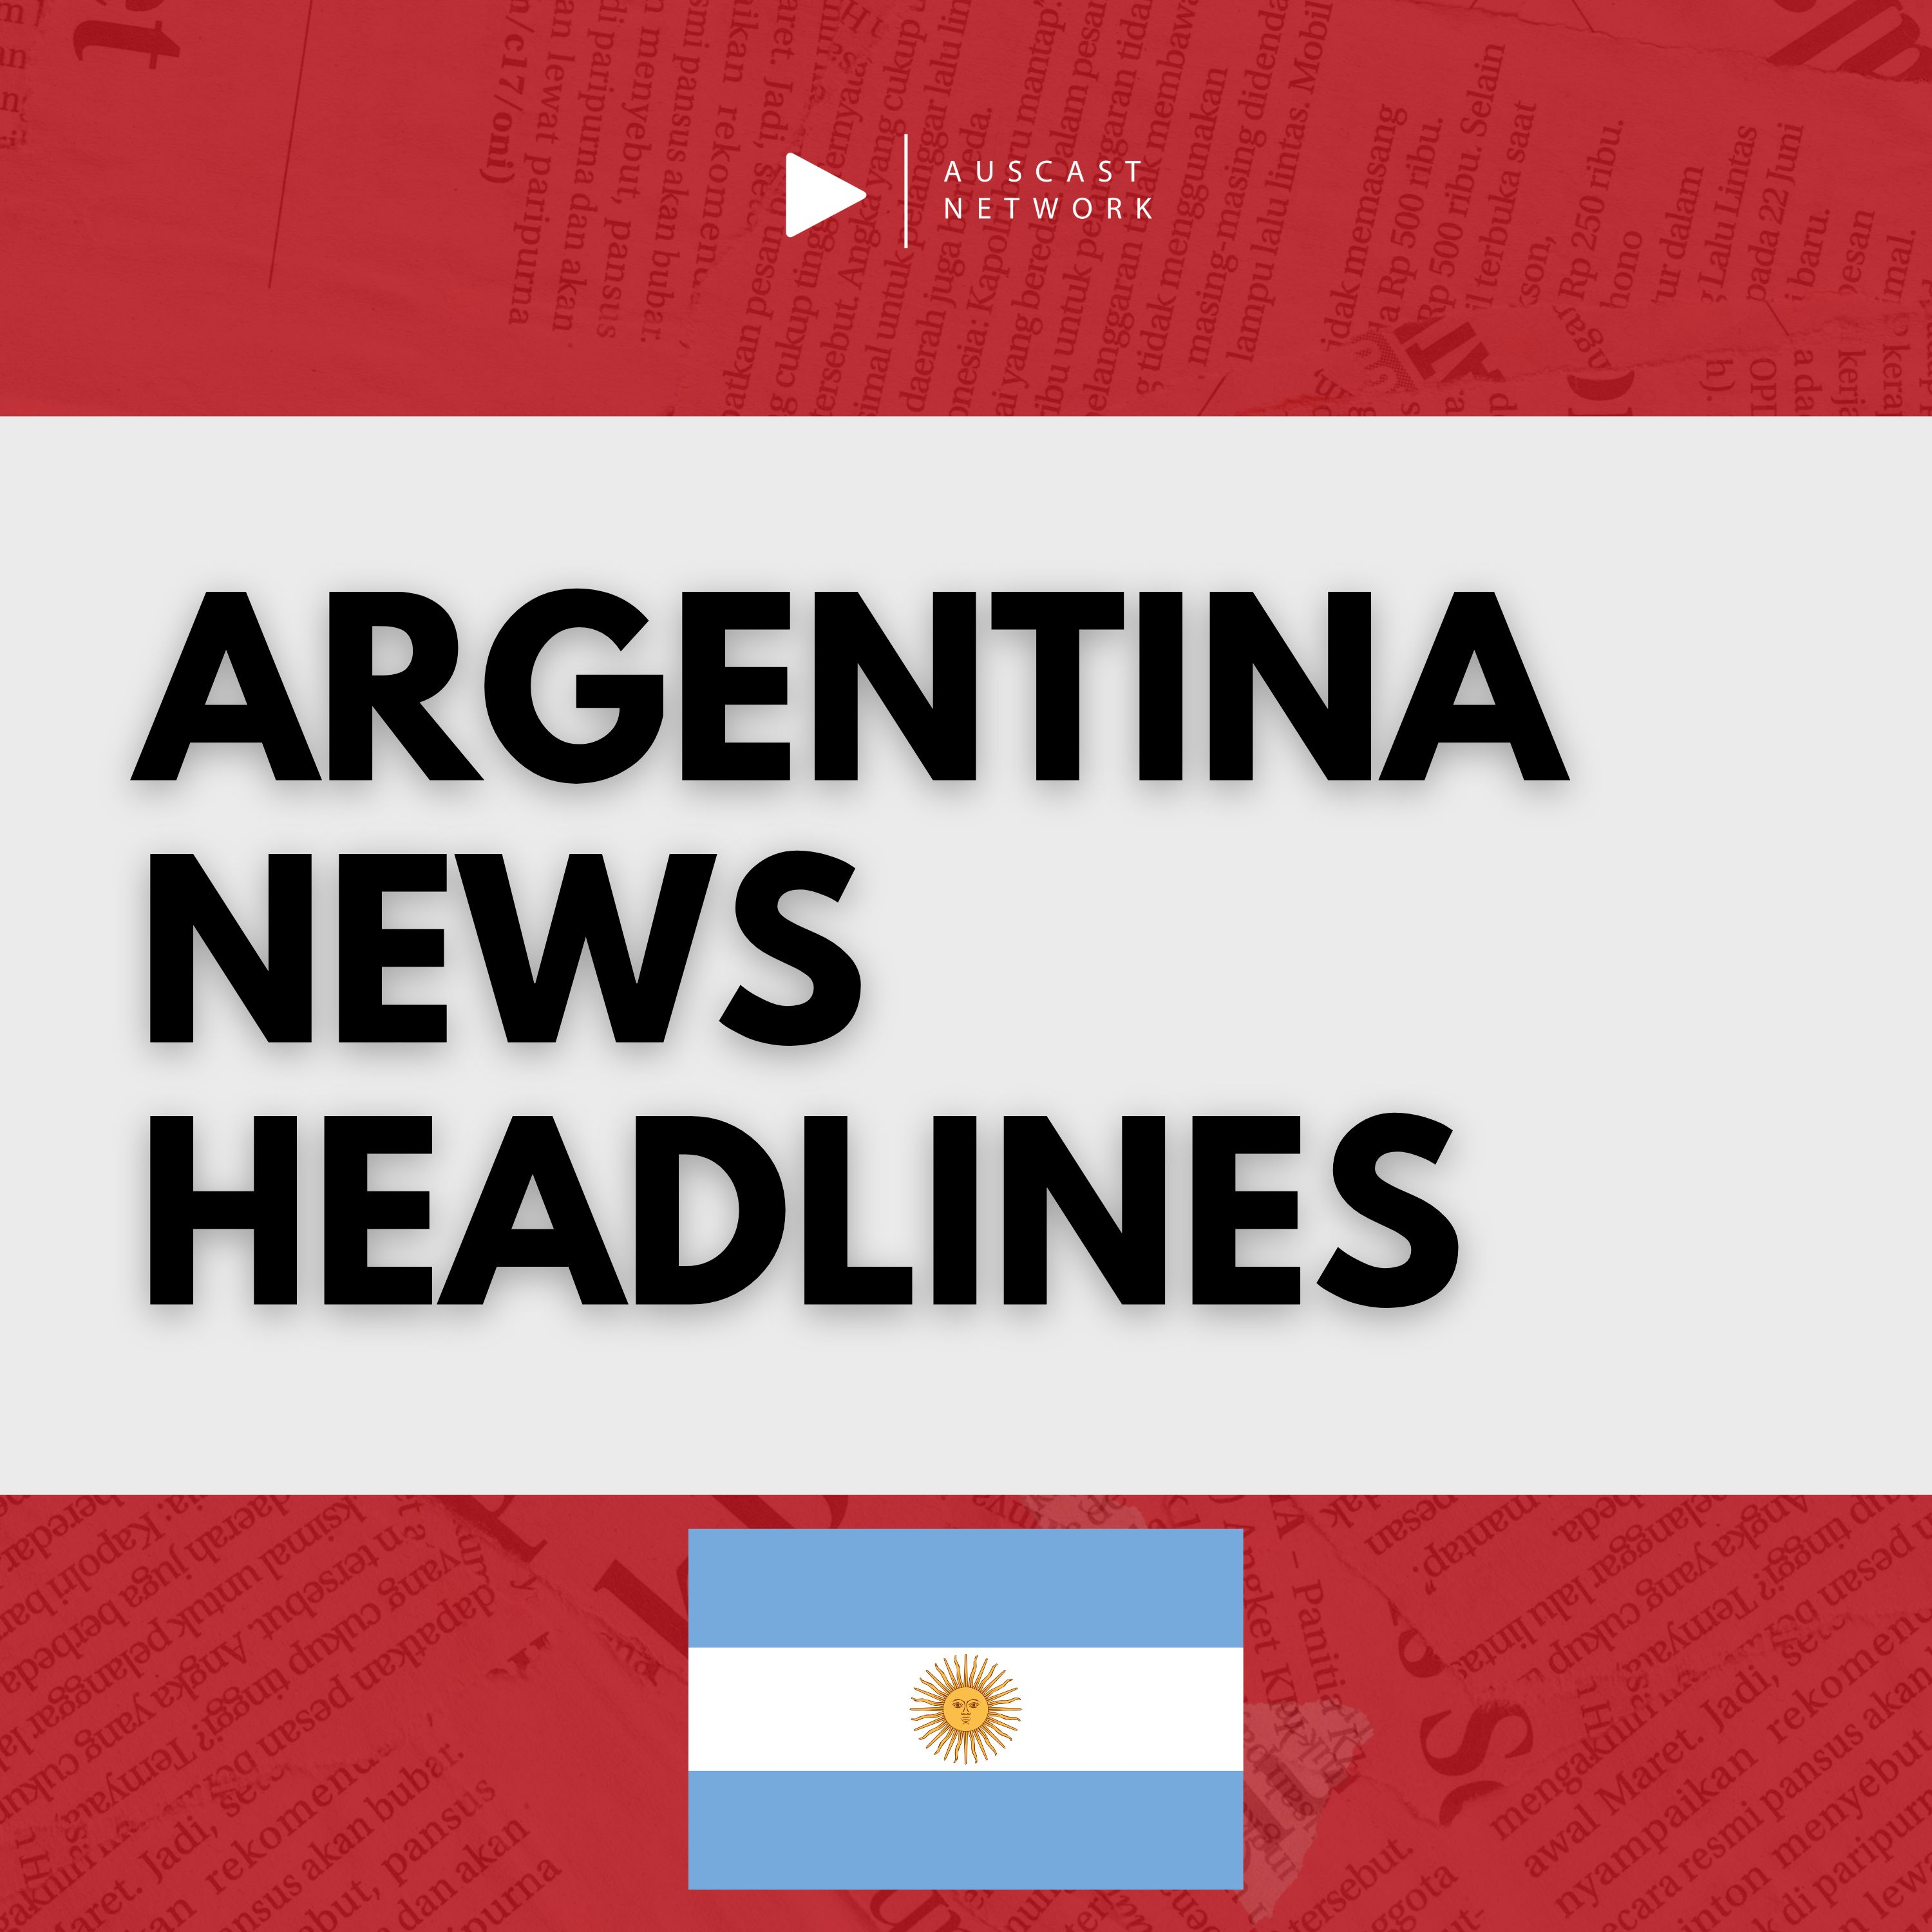 Thursday Mar 16, 2023 - Argentina - Inflation rate has skyrocketed past 100%, extreme heatwave, Argentina and Ecuador’s diplomatic dispute